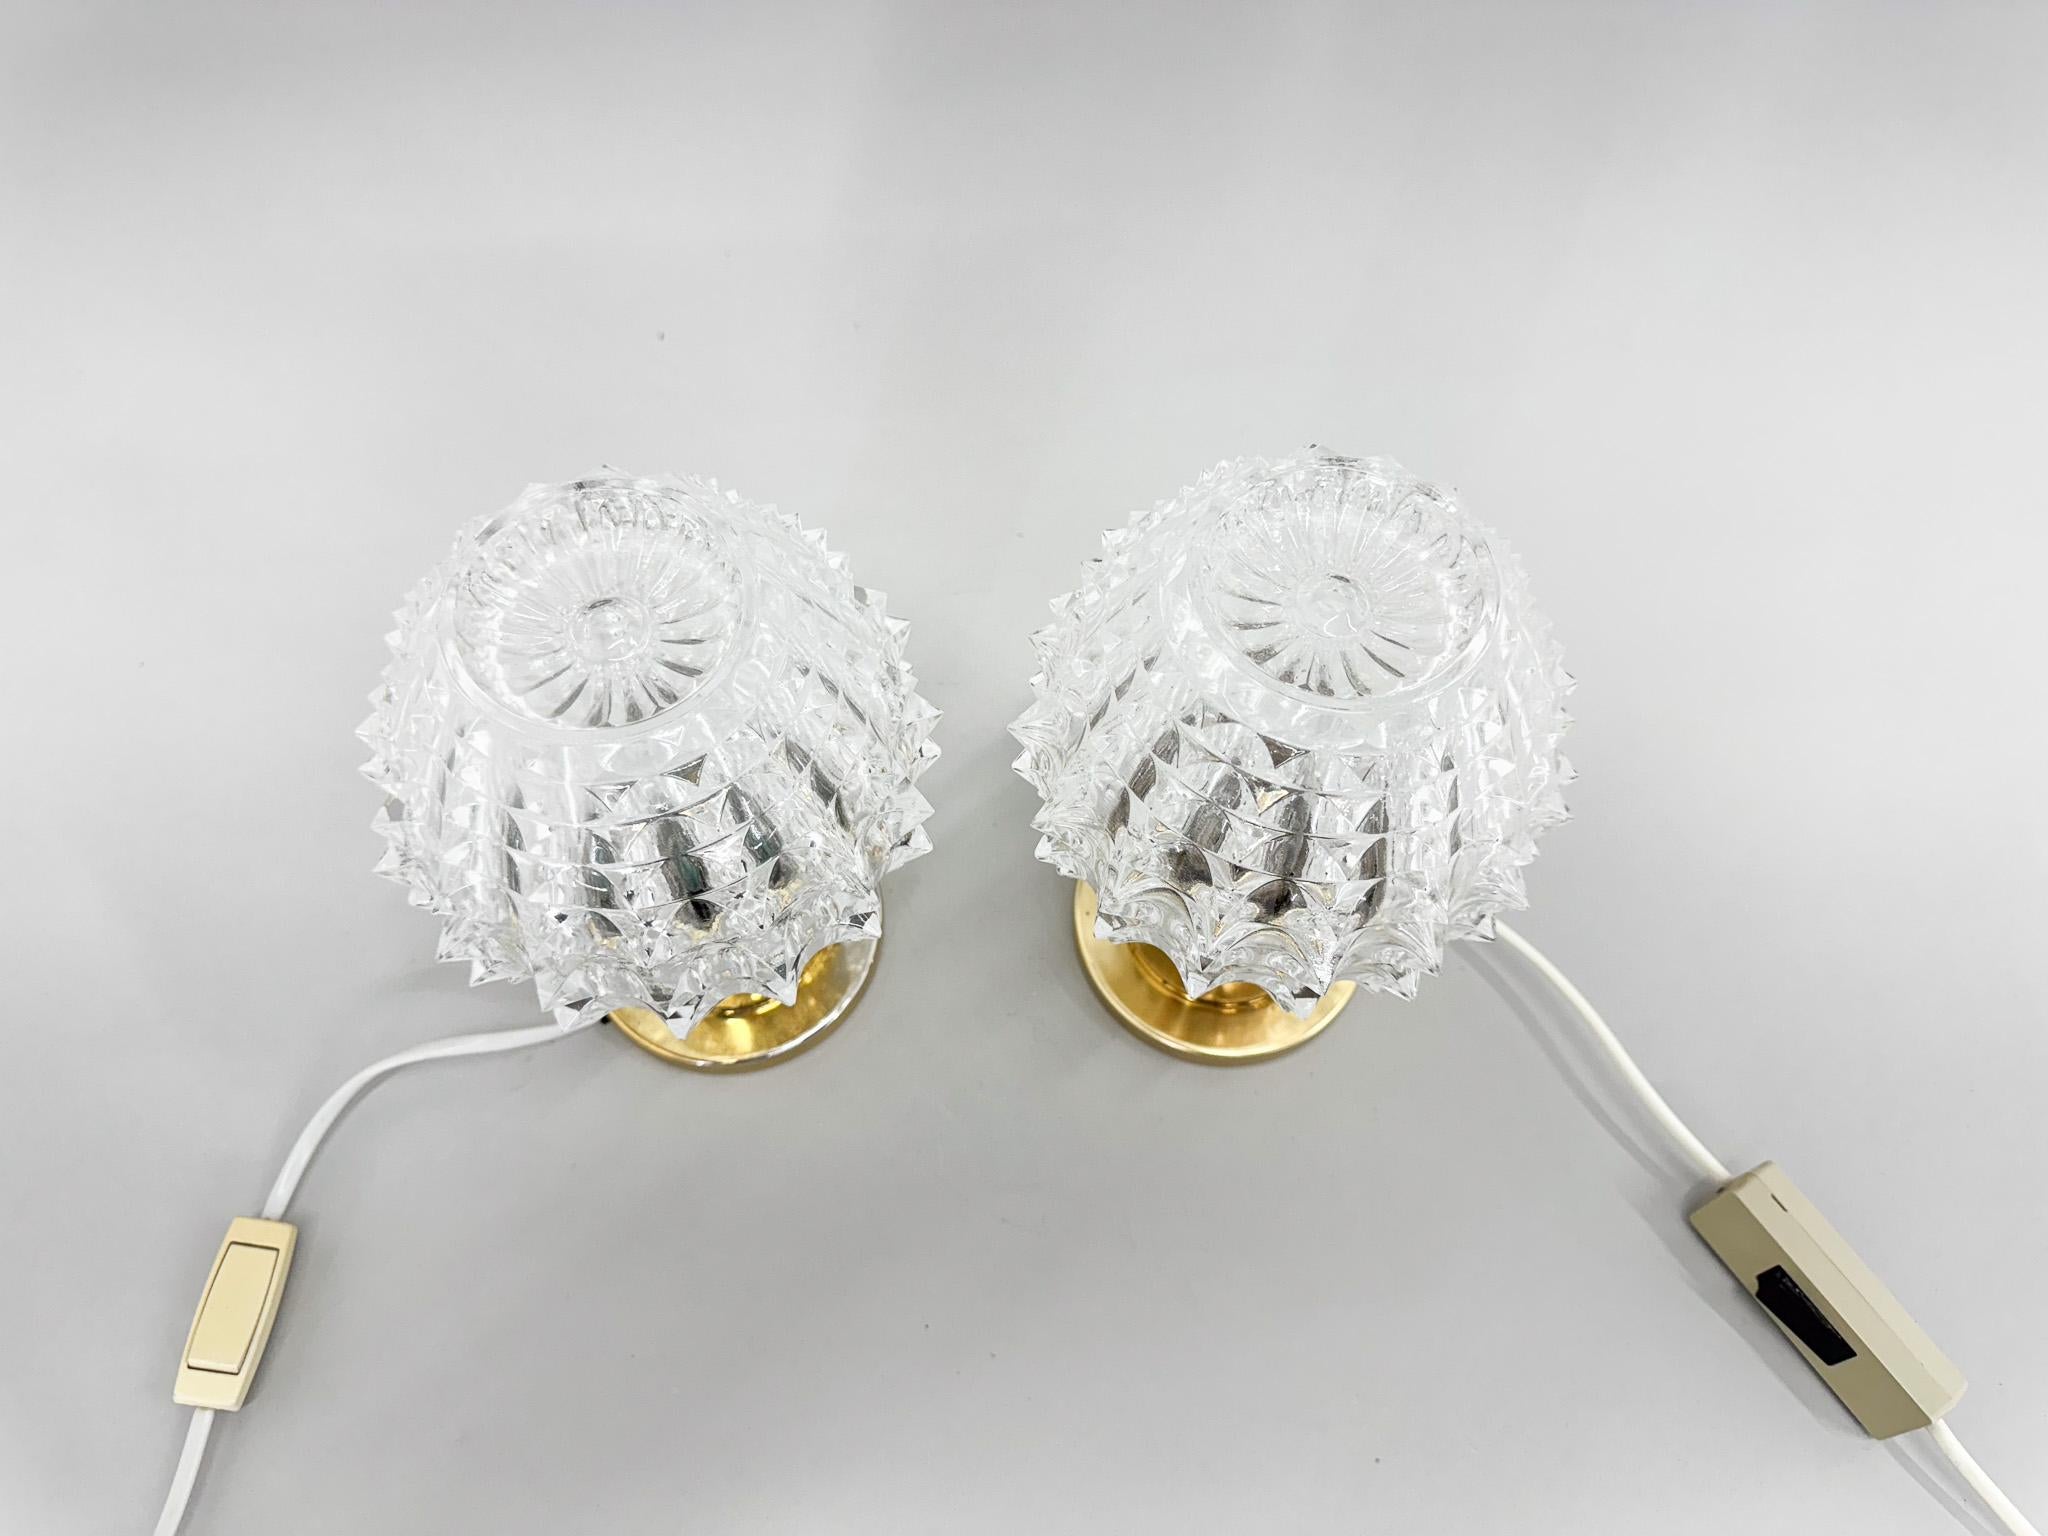 Czech Pair of Brass and Glass Table Lamps by Kamenicky Senov, 1970s For Sale